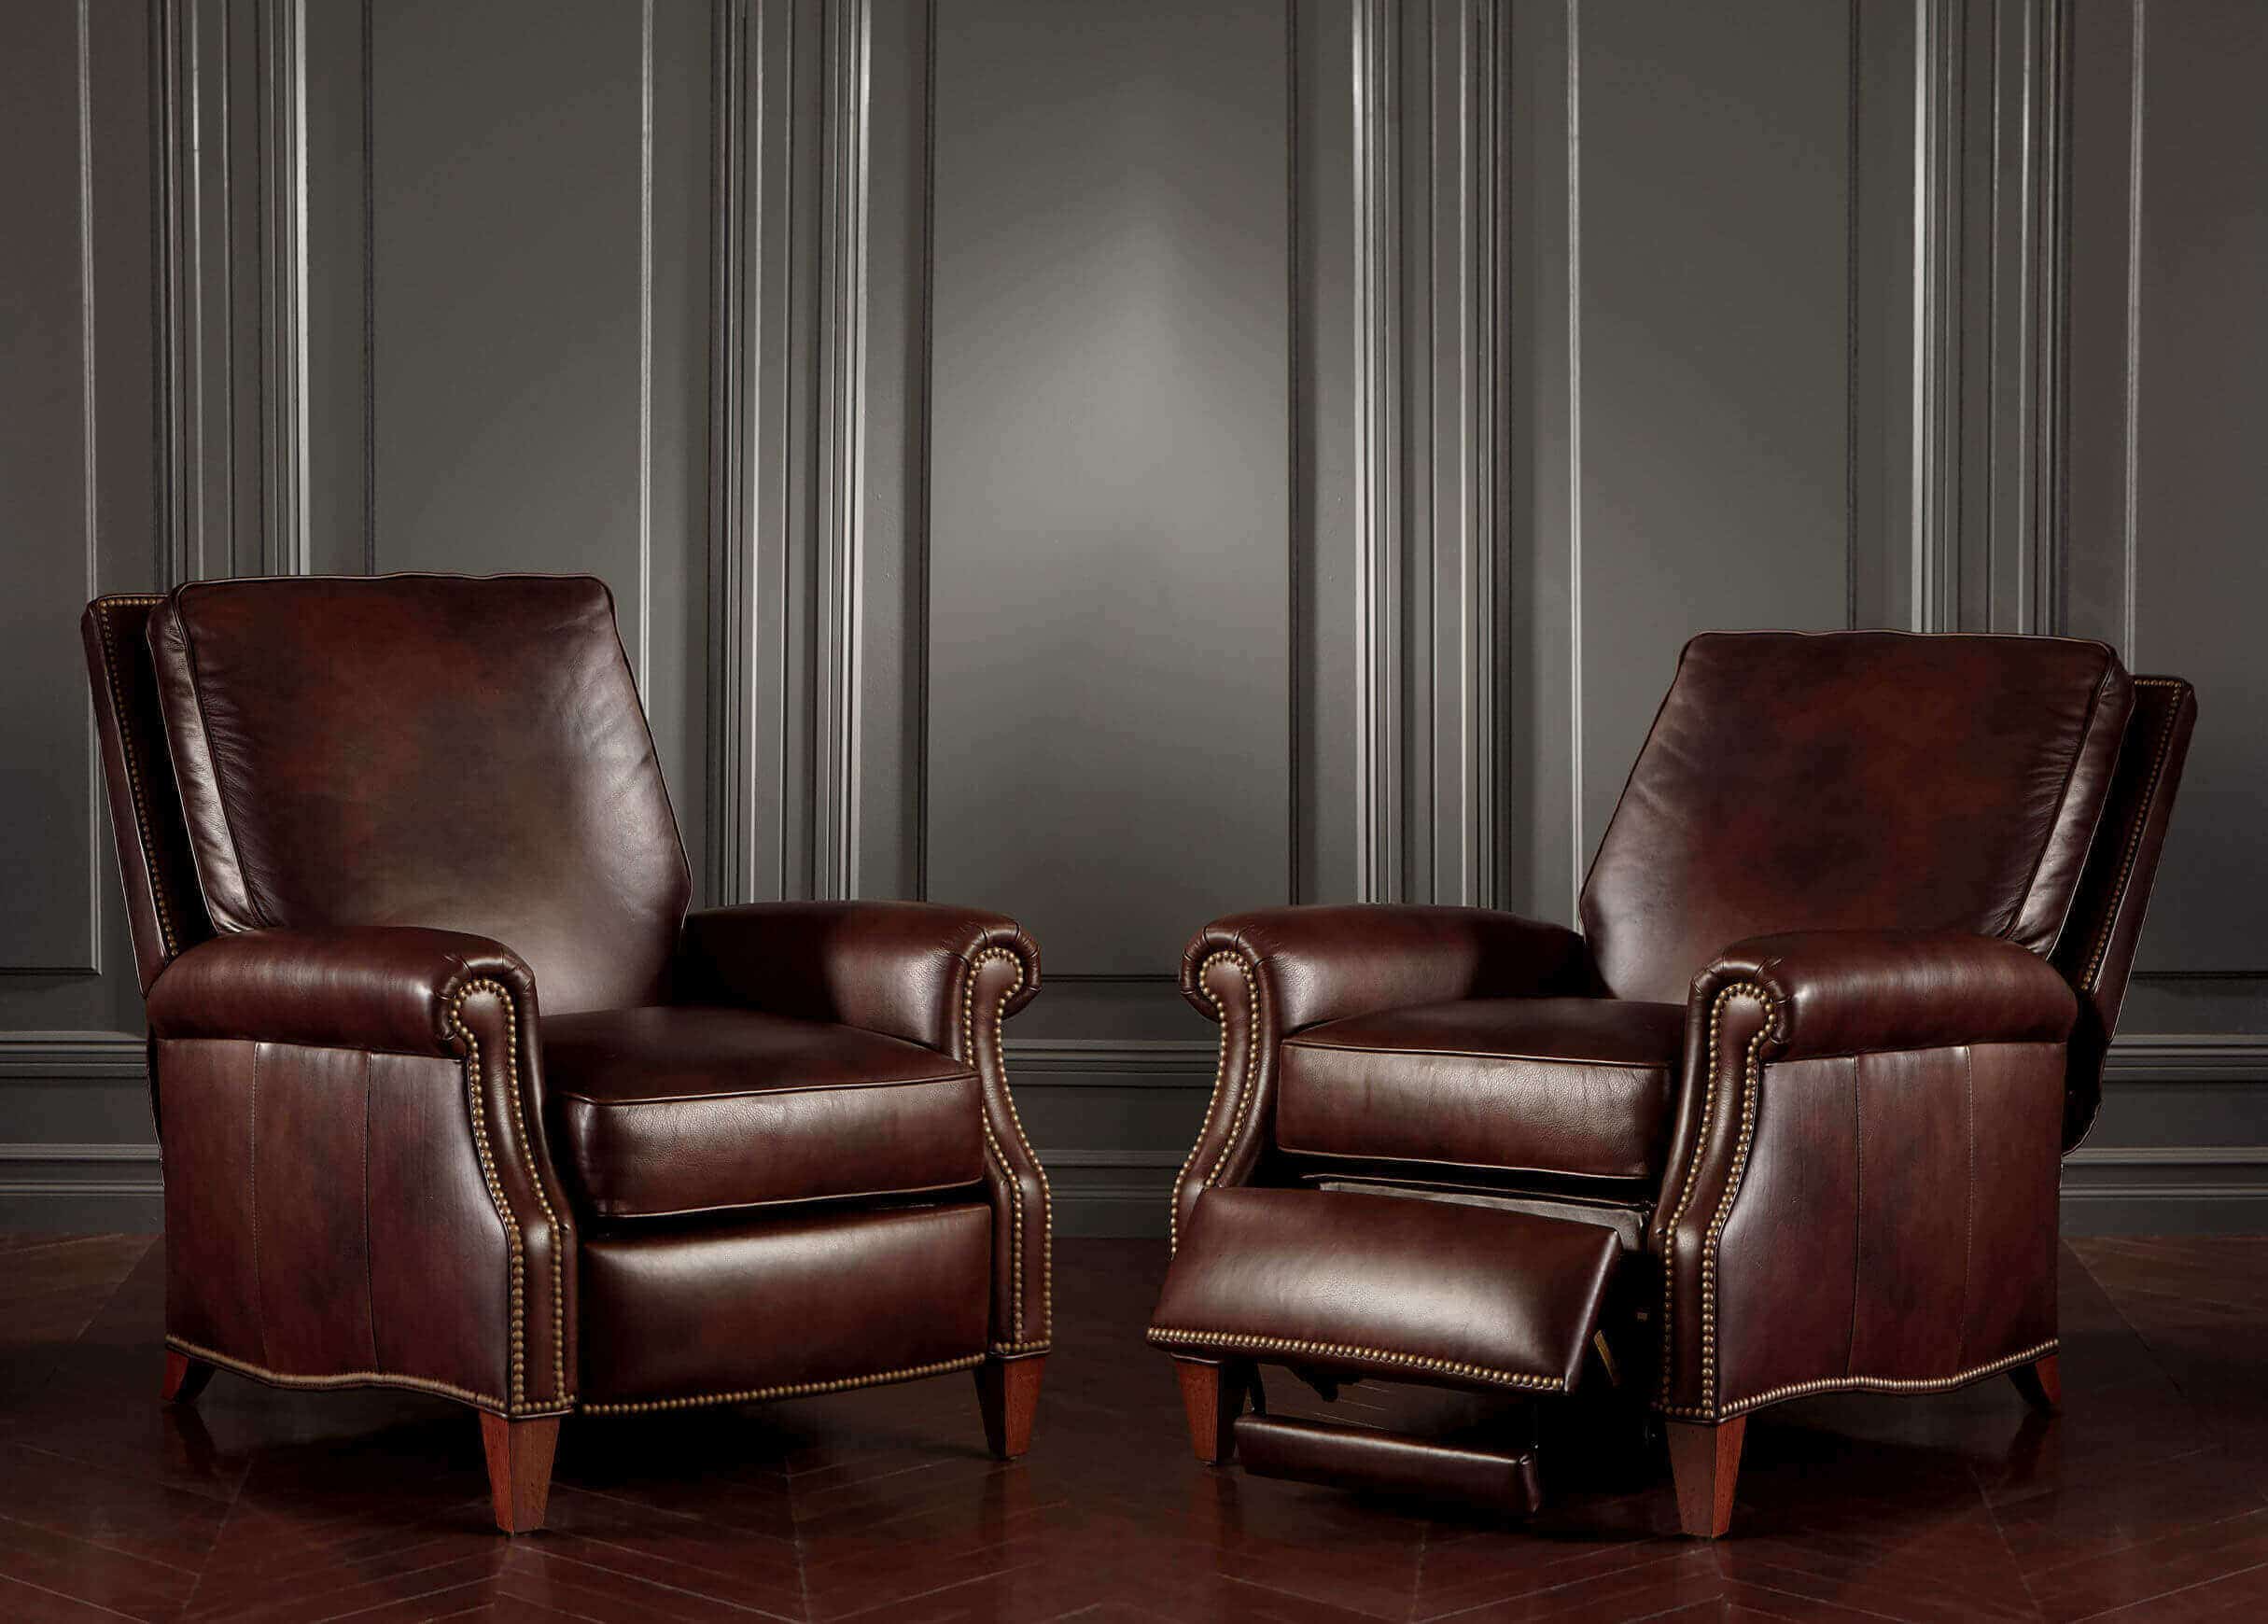 The Leather Vs Fabric Recliner Which, Leather And Fabric Recliner